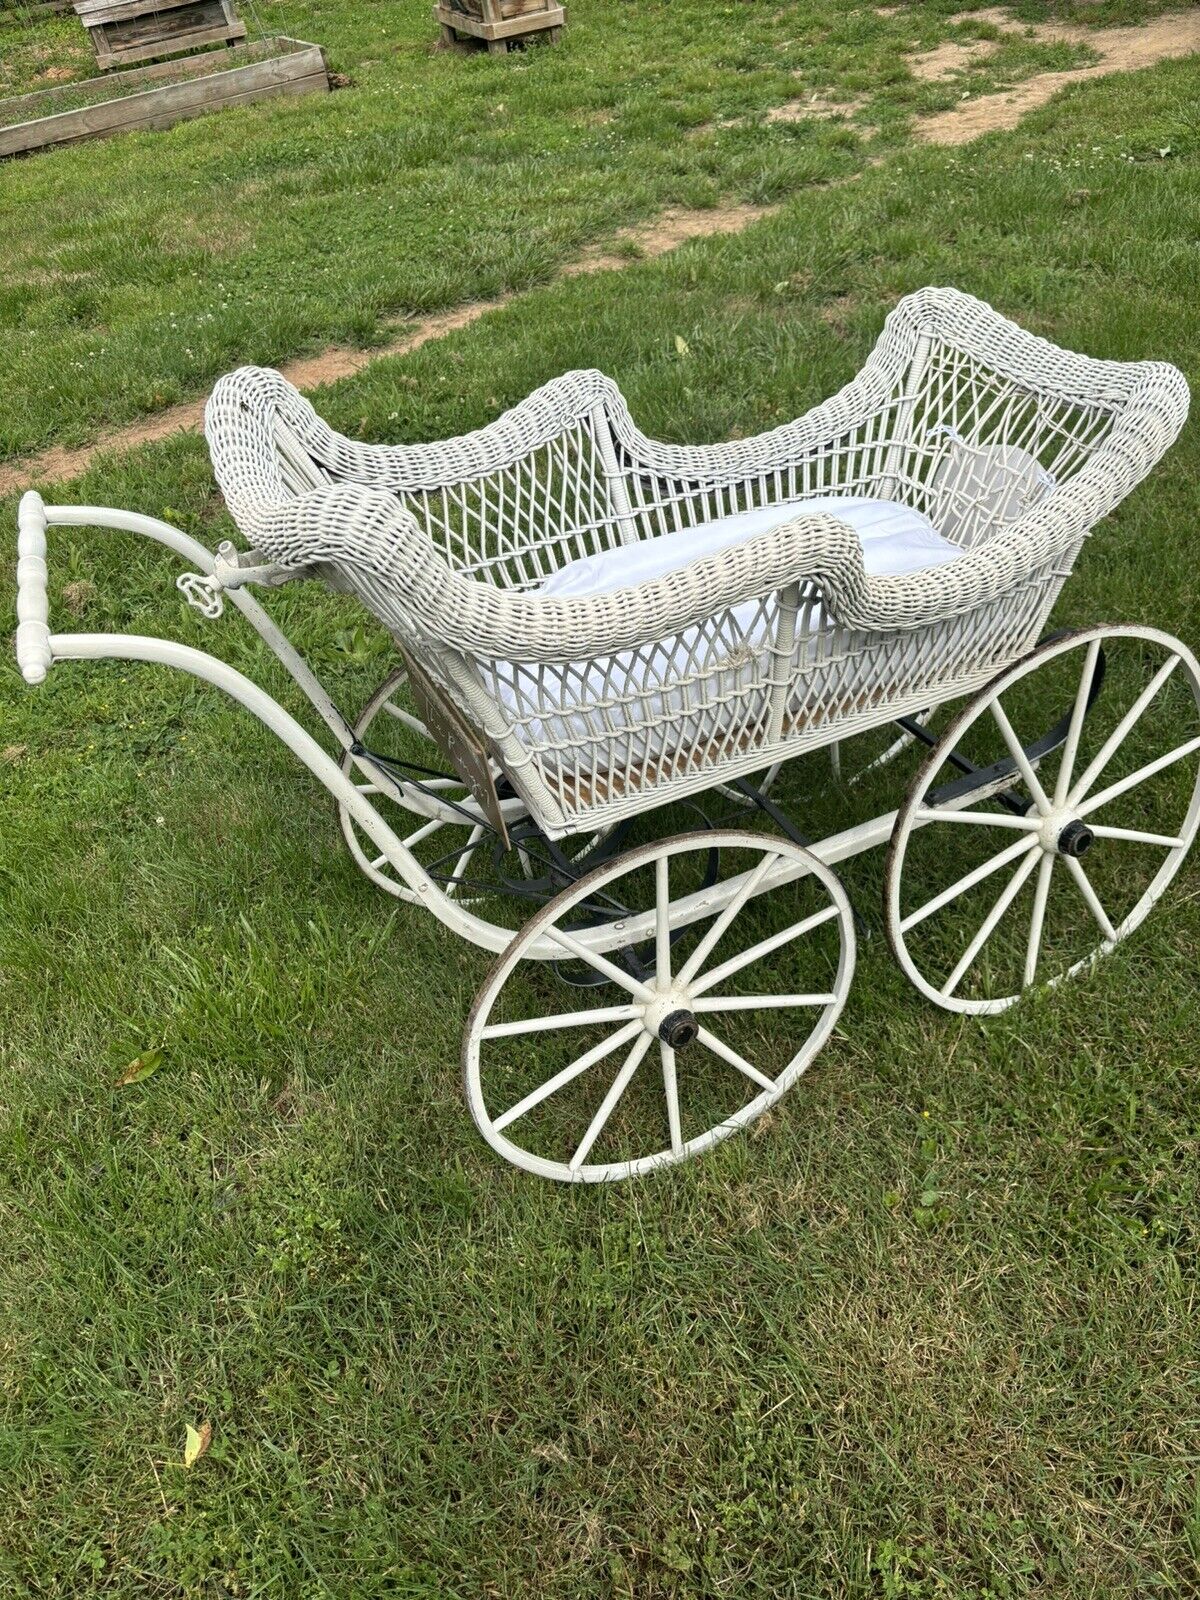 Late 18th- Early 19th Century Wicker Baby Carriage “Pram”